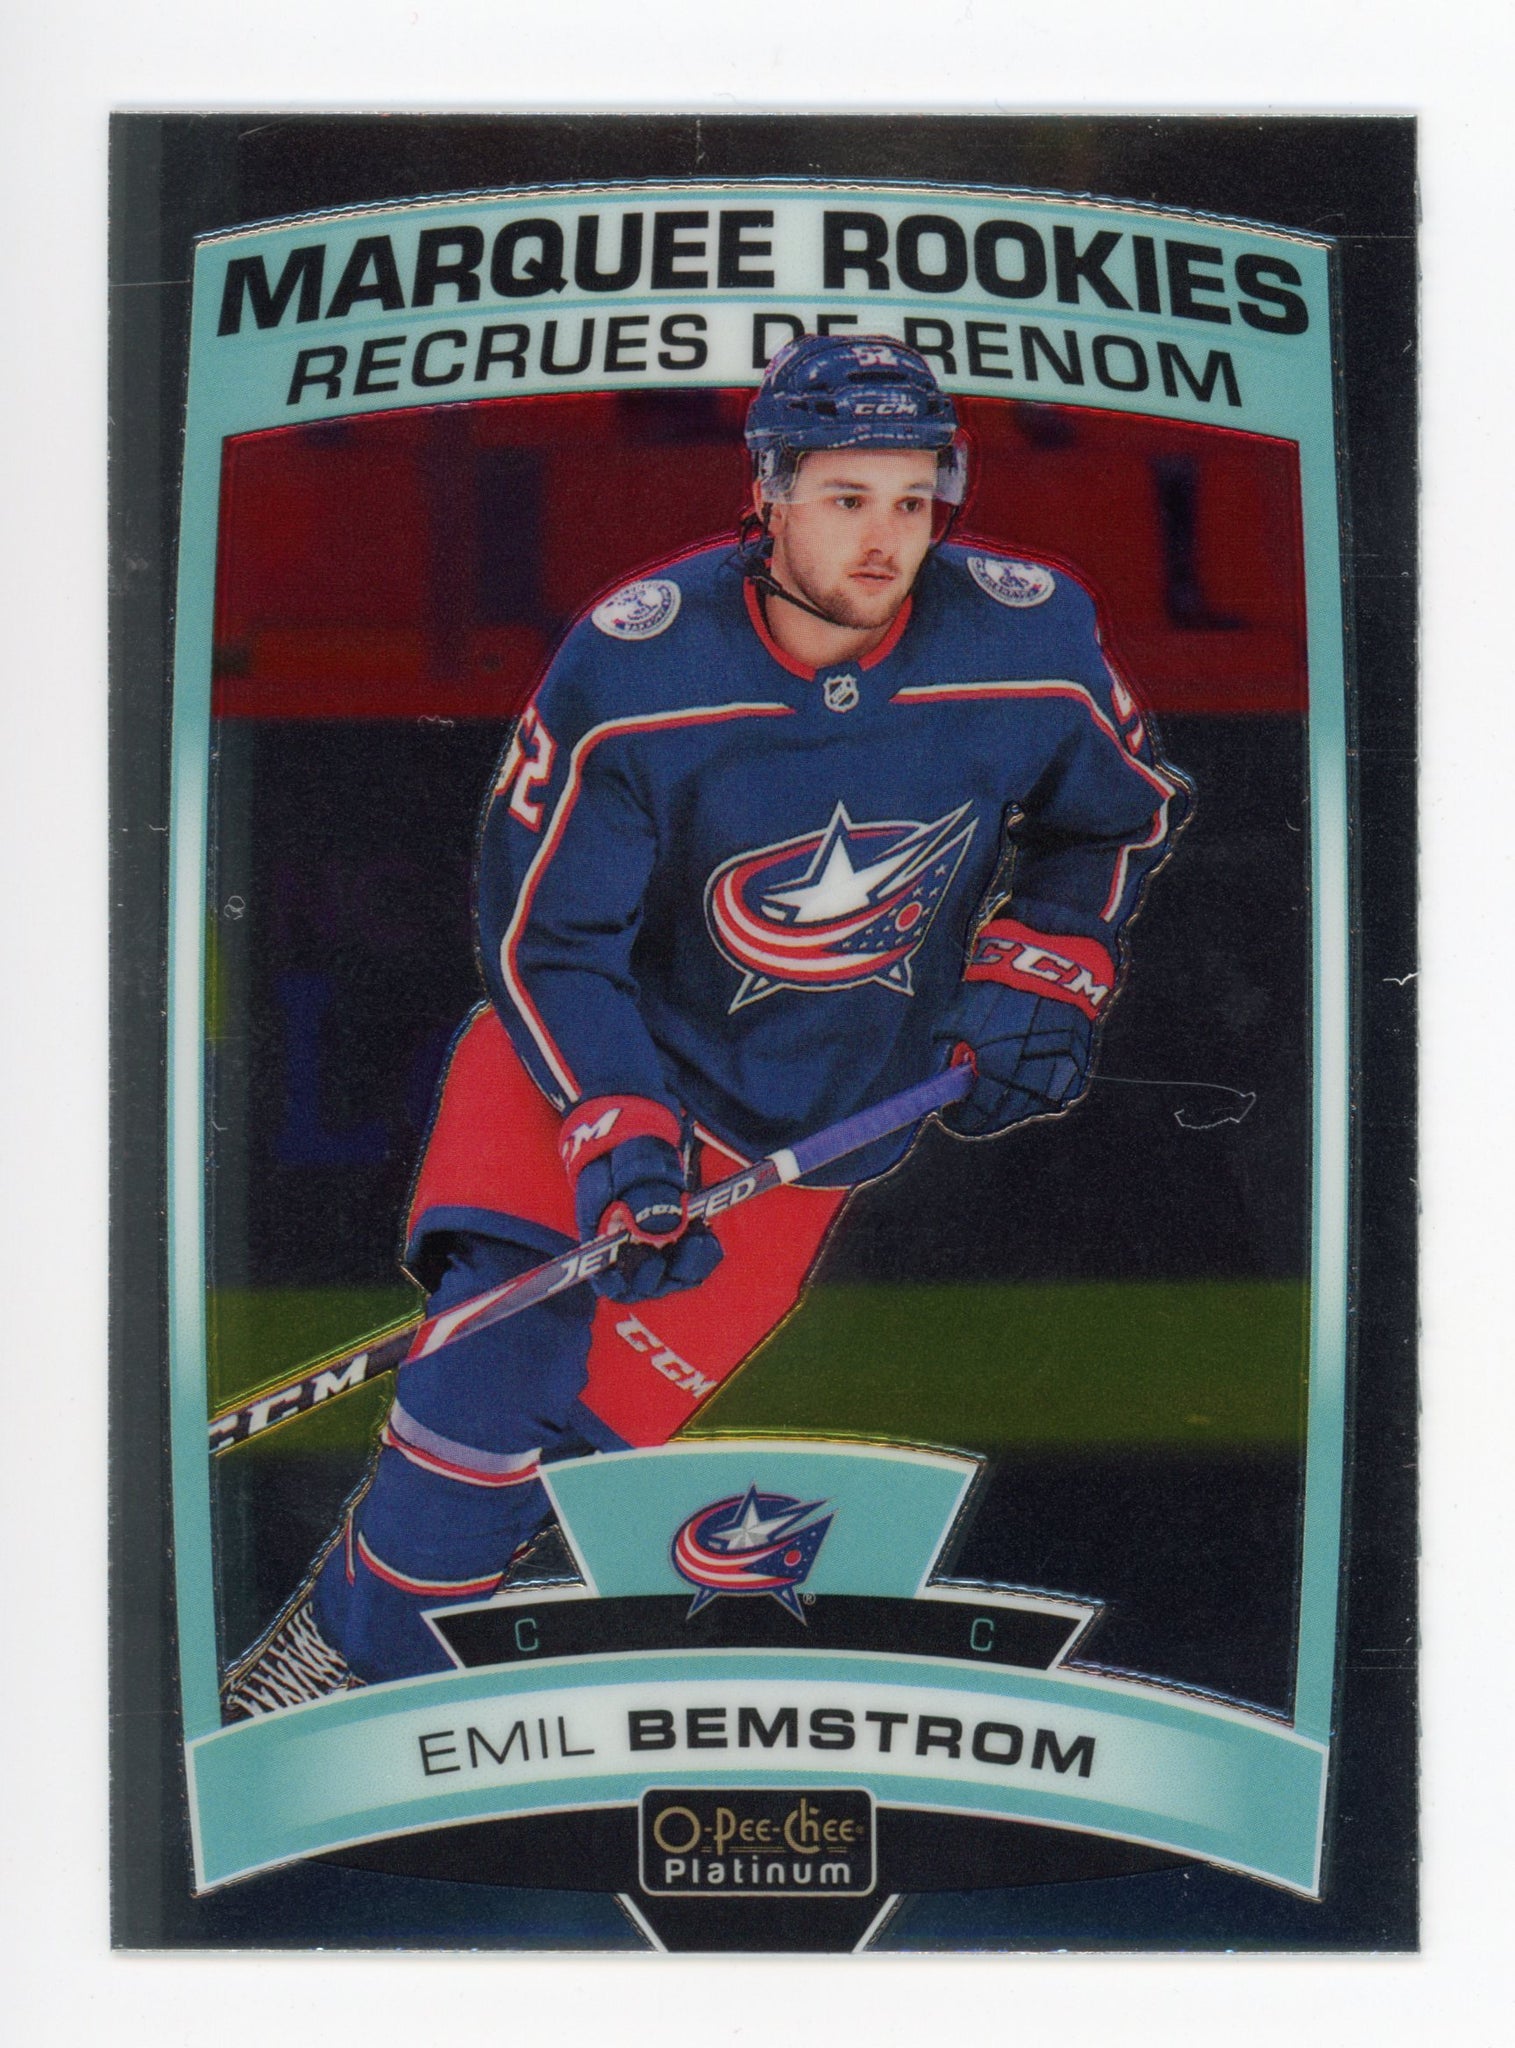 2020 Emil Bemstrom Marquee Rookies OPC Columbus Blue Jackets # 166